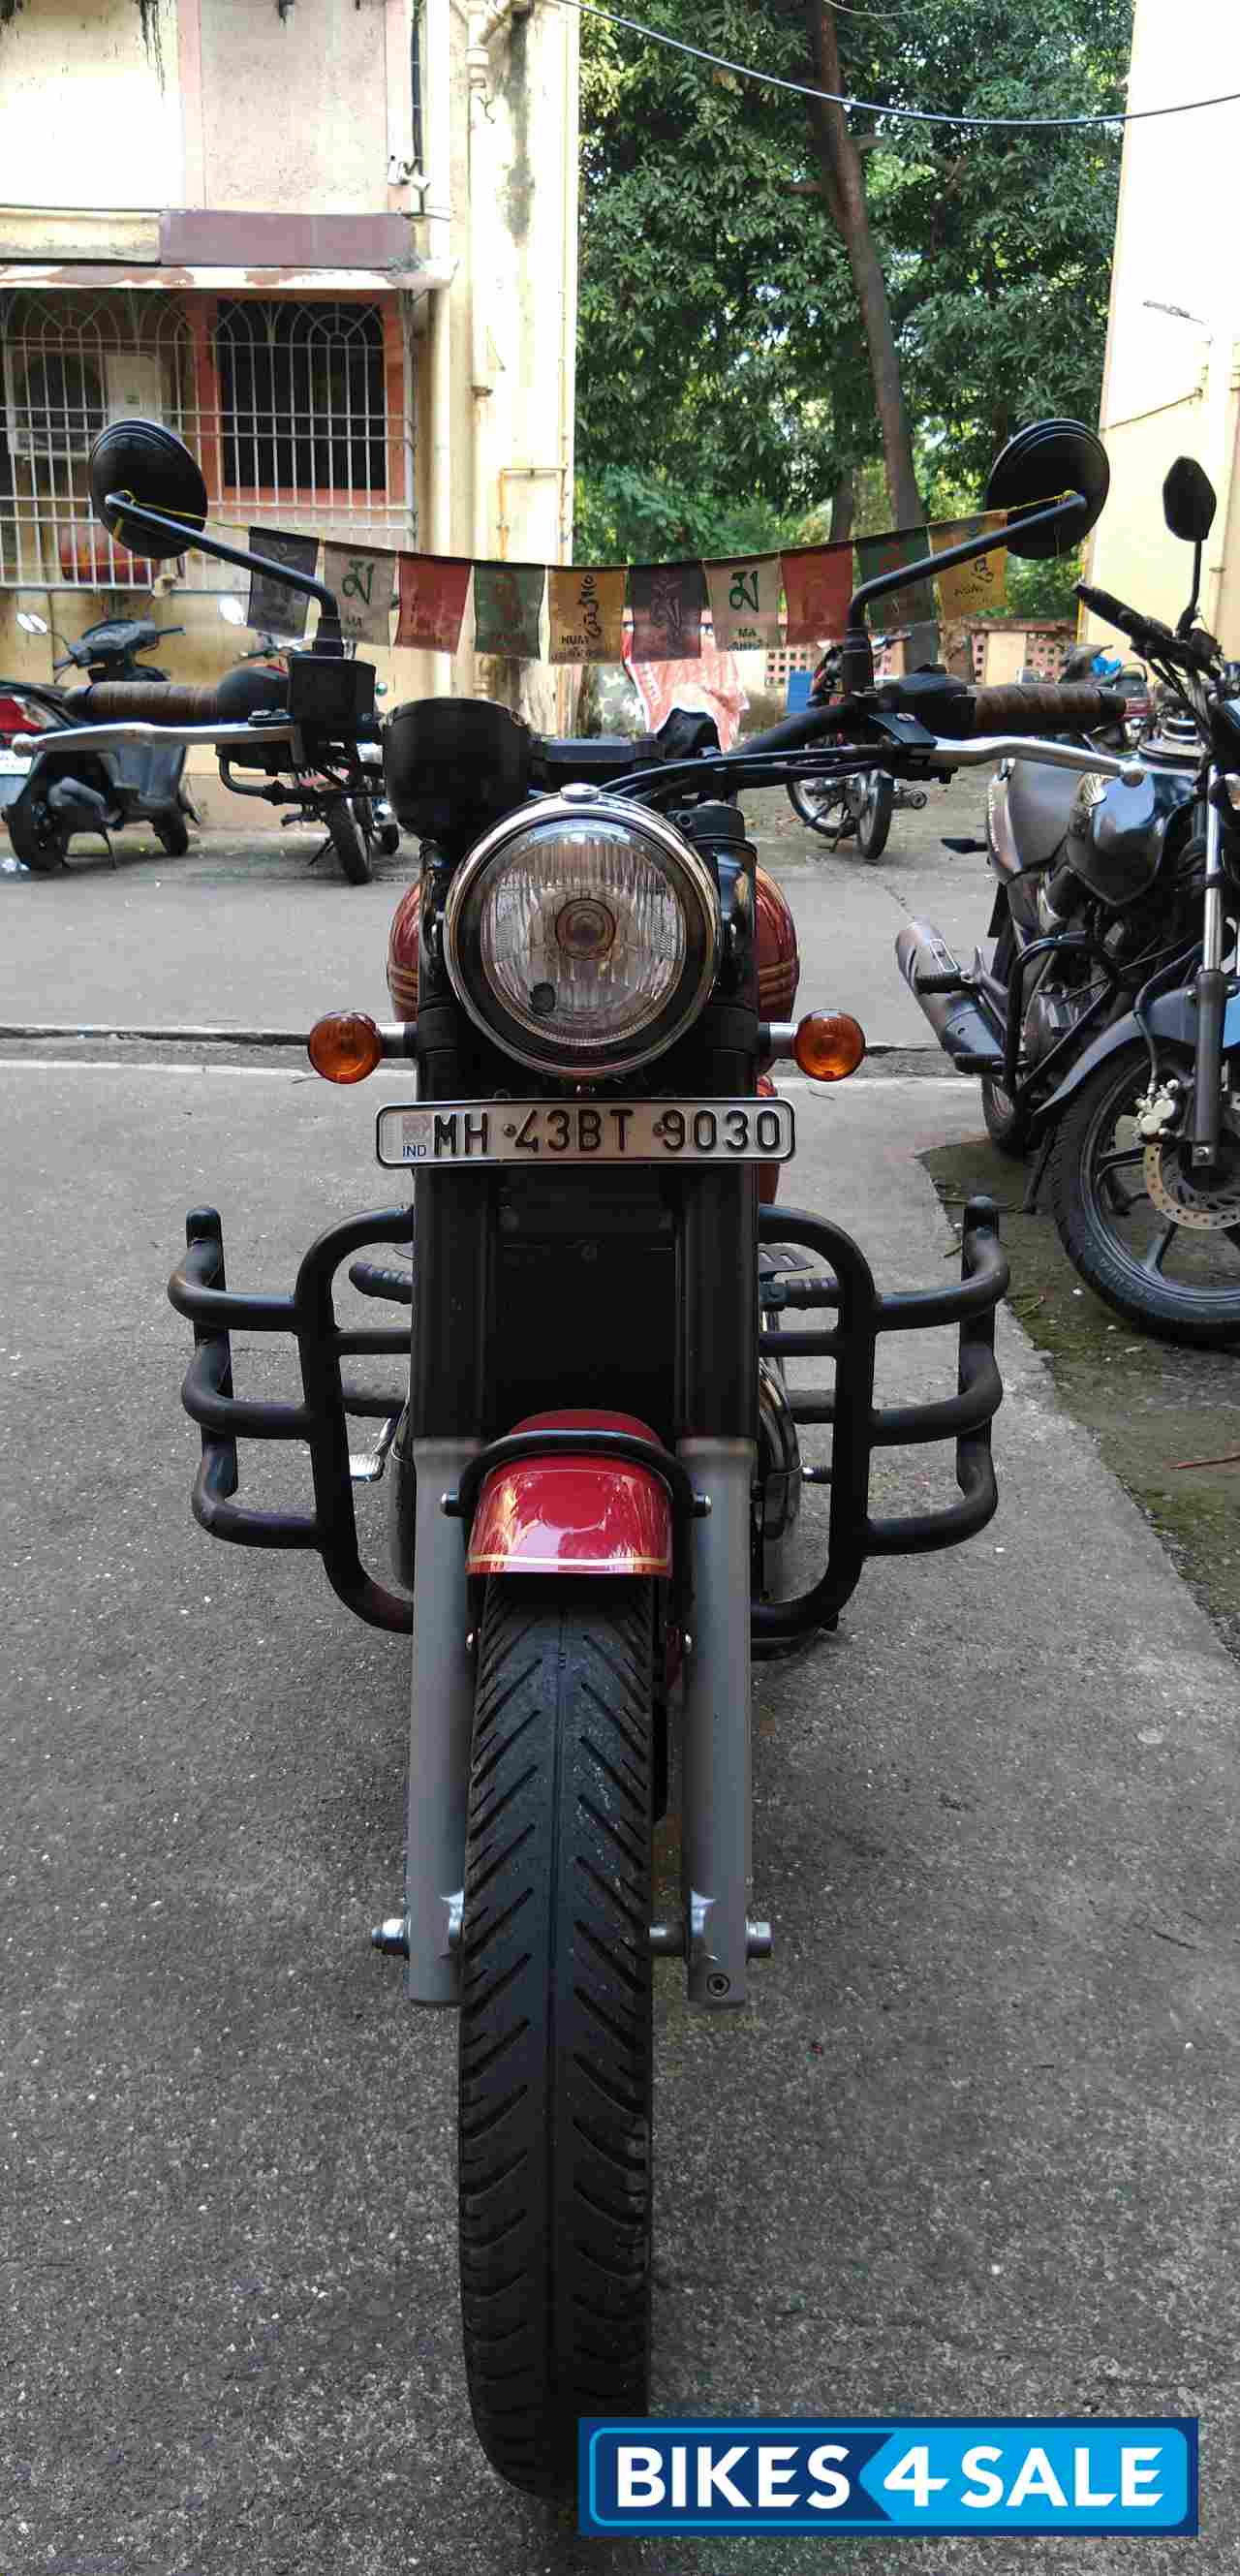 Red Jawa forty two